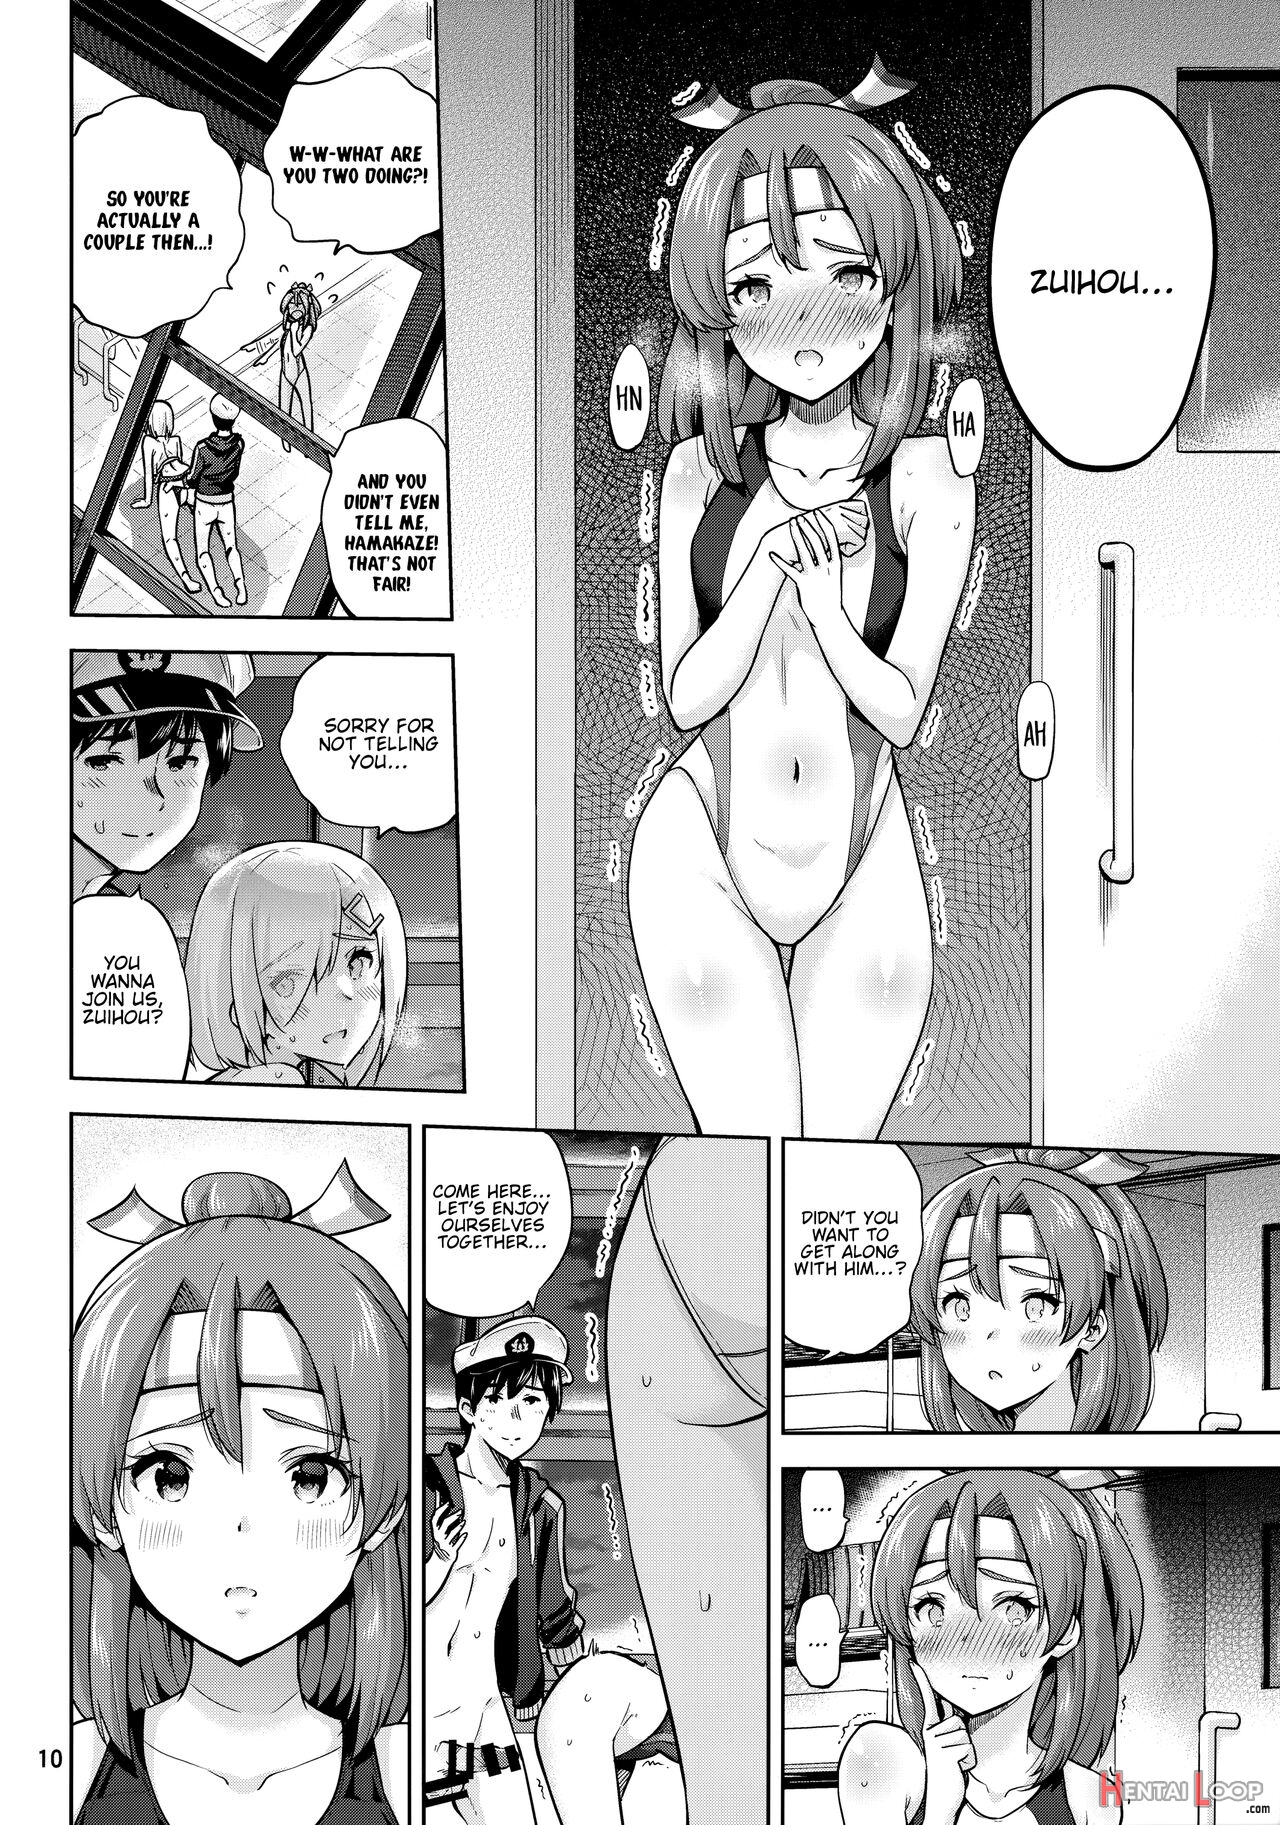 Zuihou And Hamakaze In Racing Swimsuits. page 12